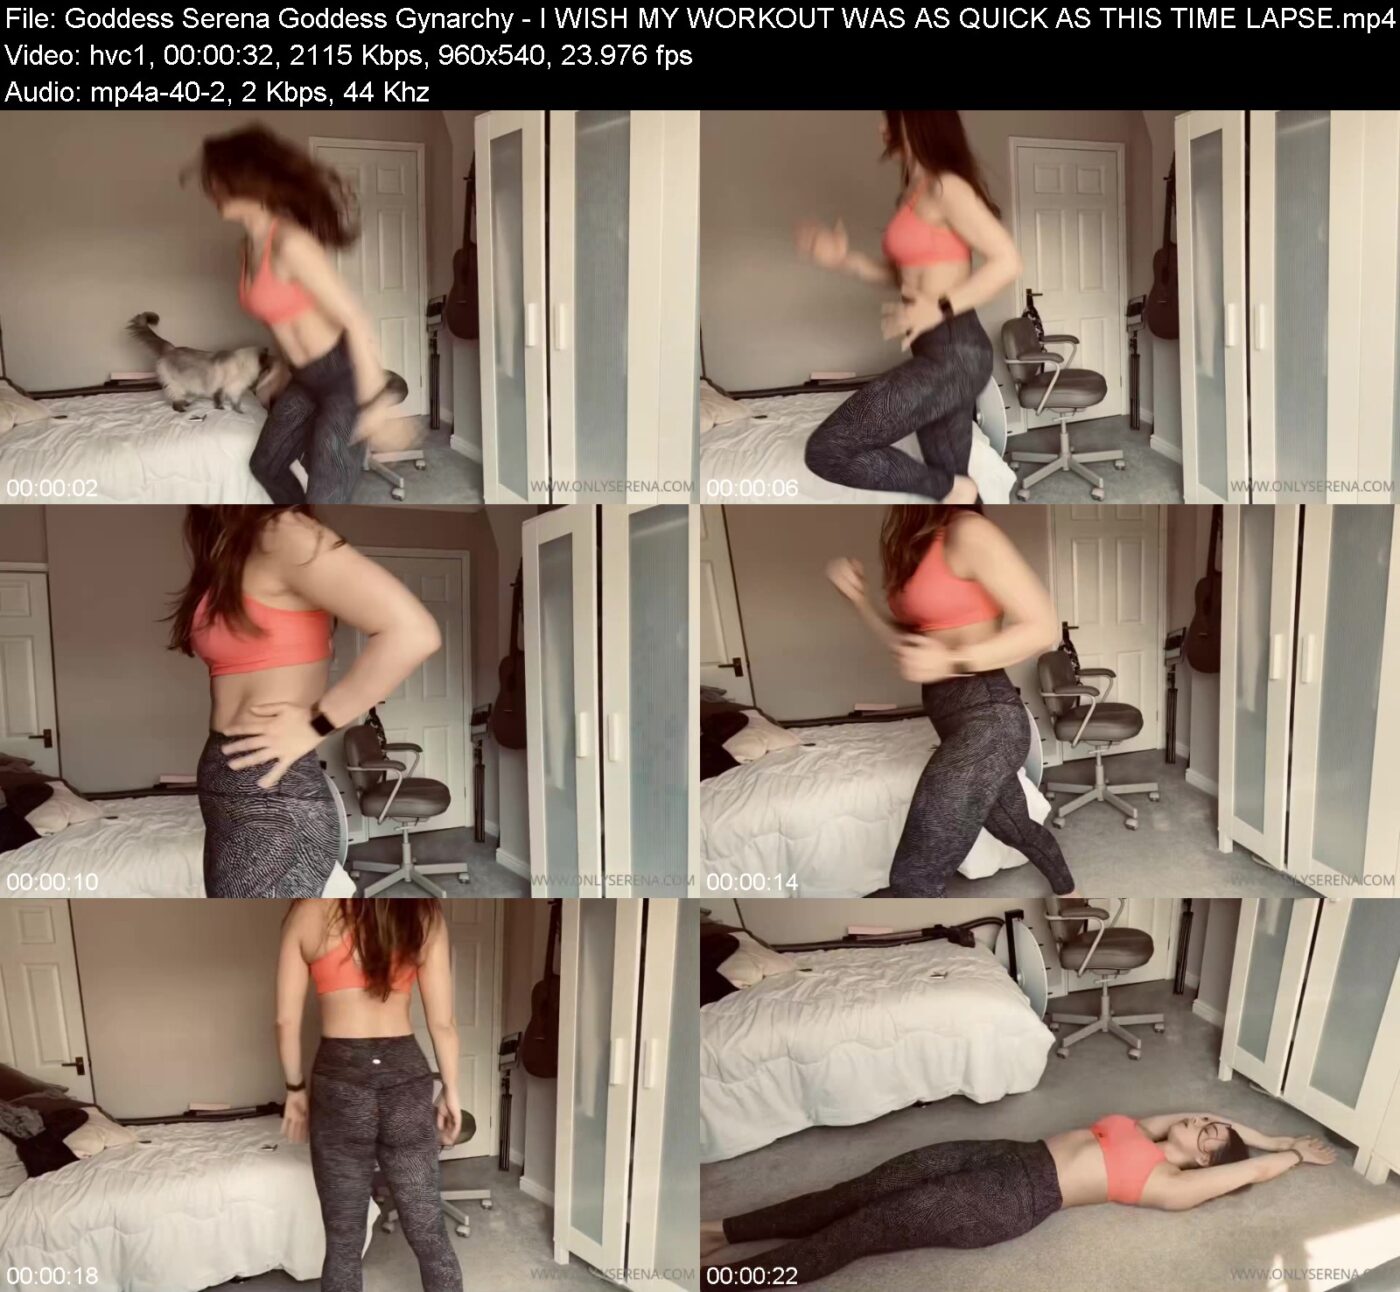 Goddess Serena Goddess Gynarchy in I WISH MY WORKOUT WAS AS QUICK AS THIS TIME LAPSE